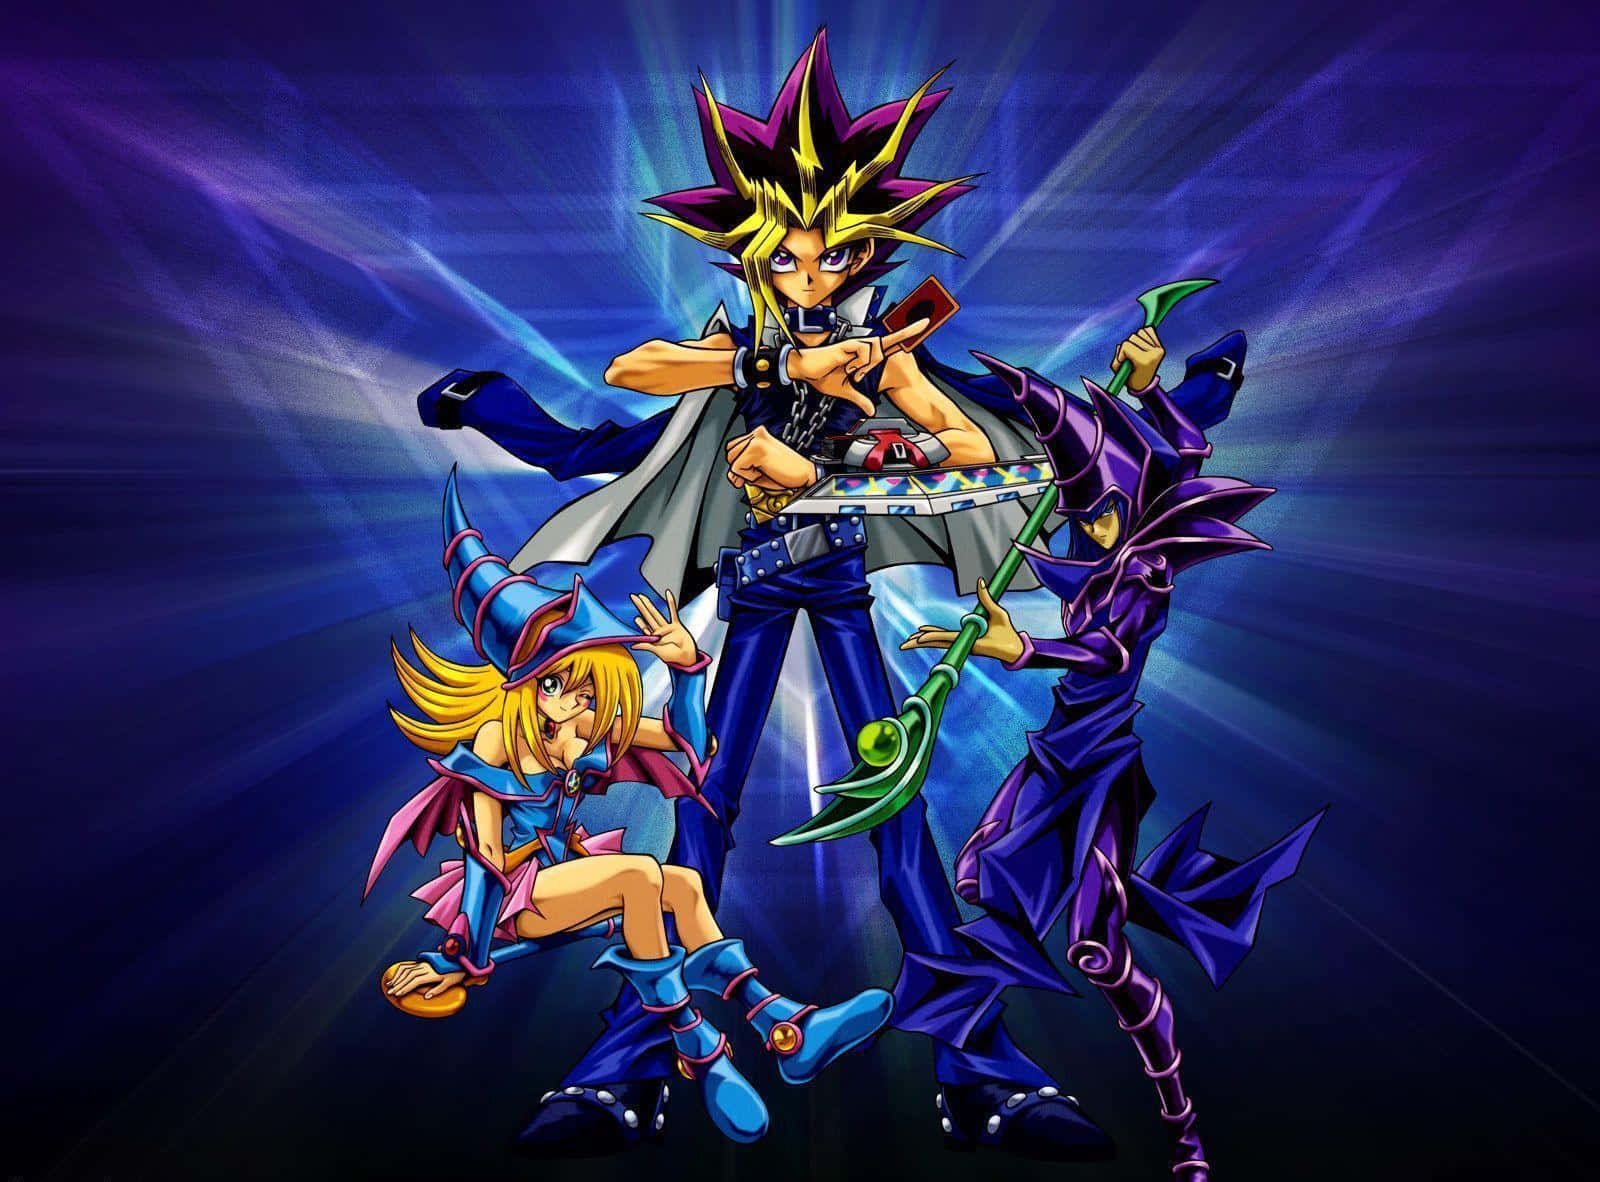 Yugi Muto holding his Duel Disk in a battle-ready stance Wallpaper